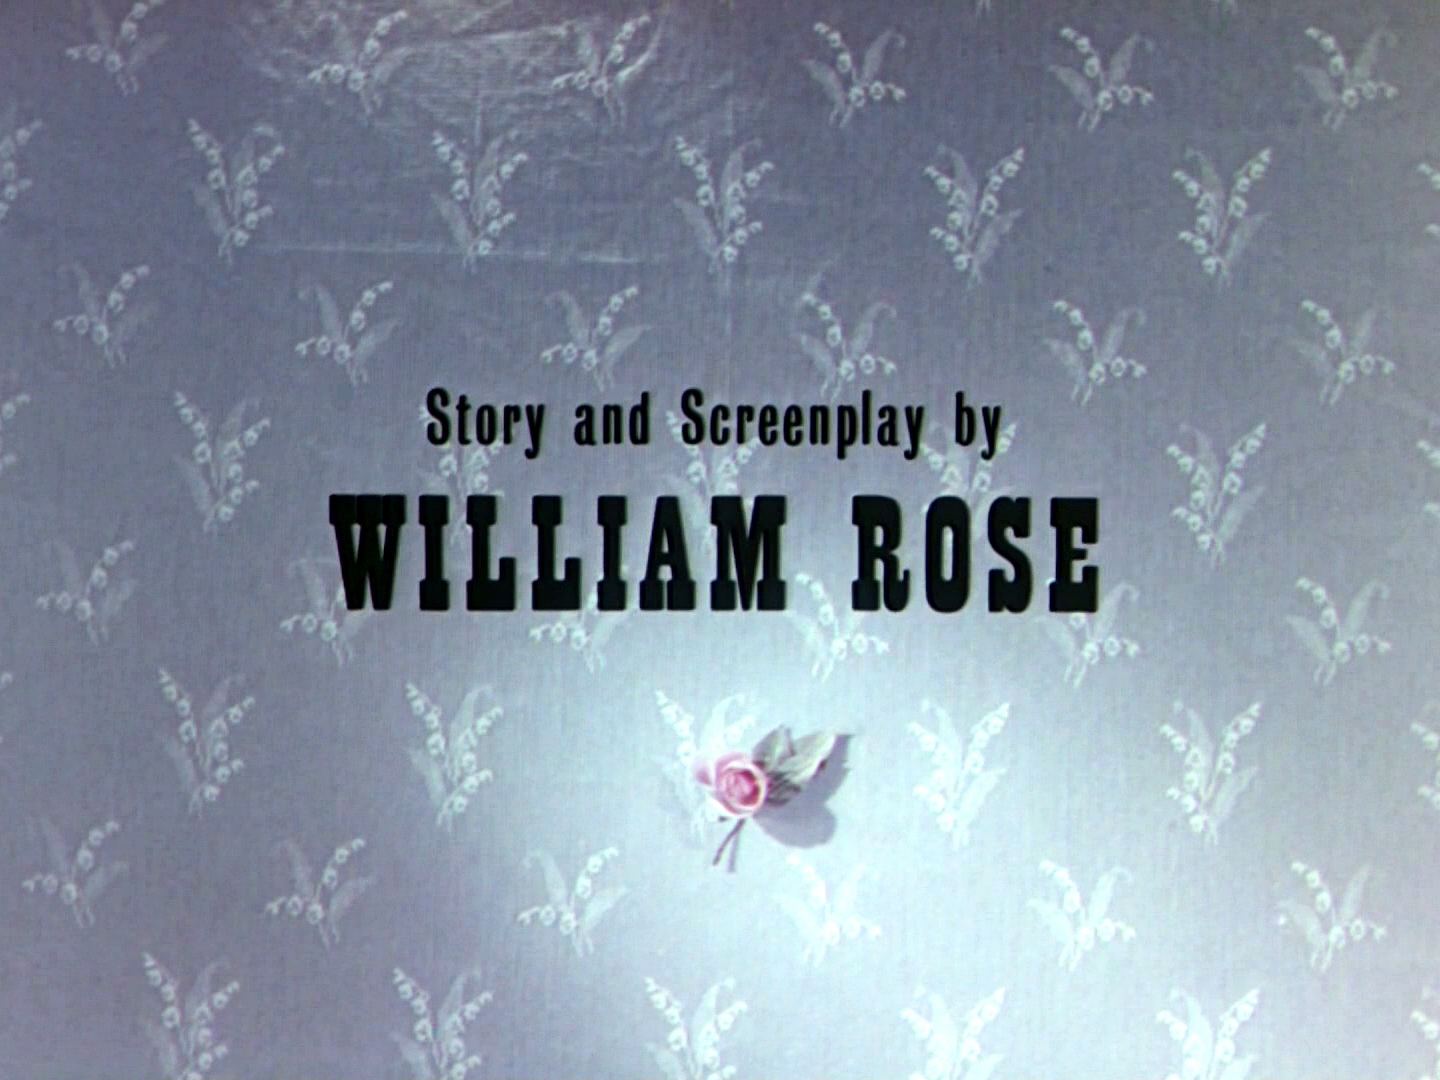 Main title from The Ladykillers (1955) (7).  Story and screenplay by William Rose